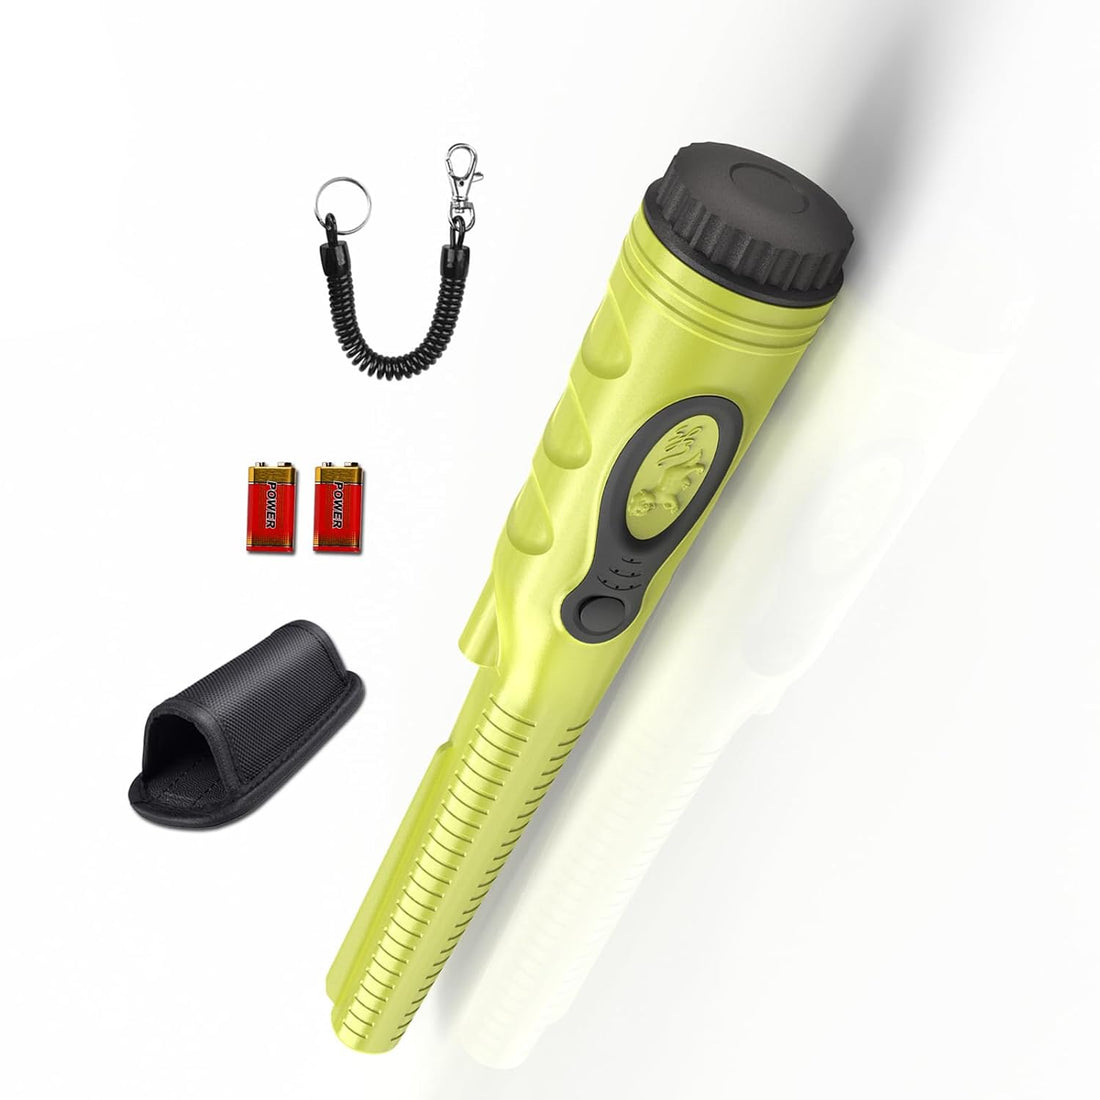 Fully Waterproof Pinpoint Metal Detector Pinpointer - 360° Search Pinpointing Finder Probe Treasure Hunting Tool Accessories for Adults and Kids (Three Mode) 2023 Hs08 Green